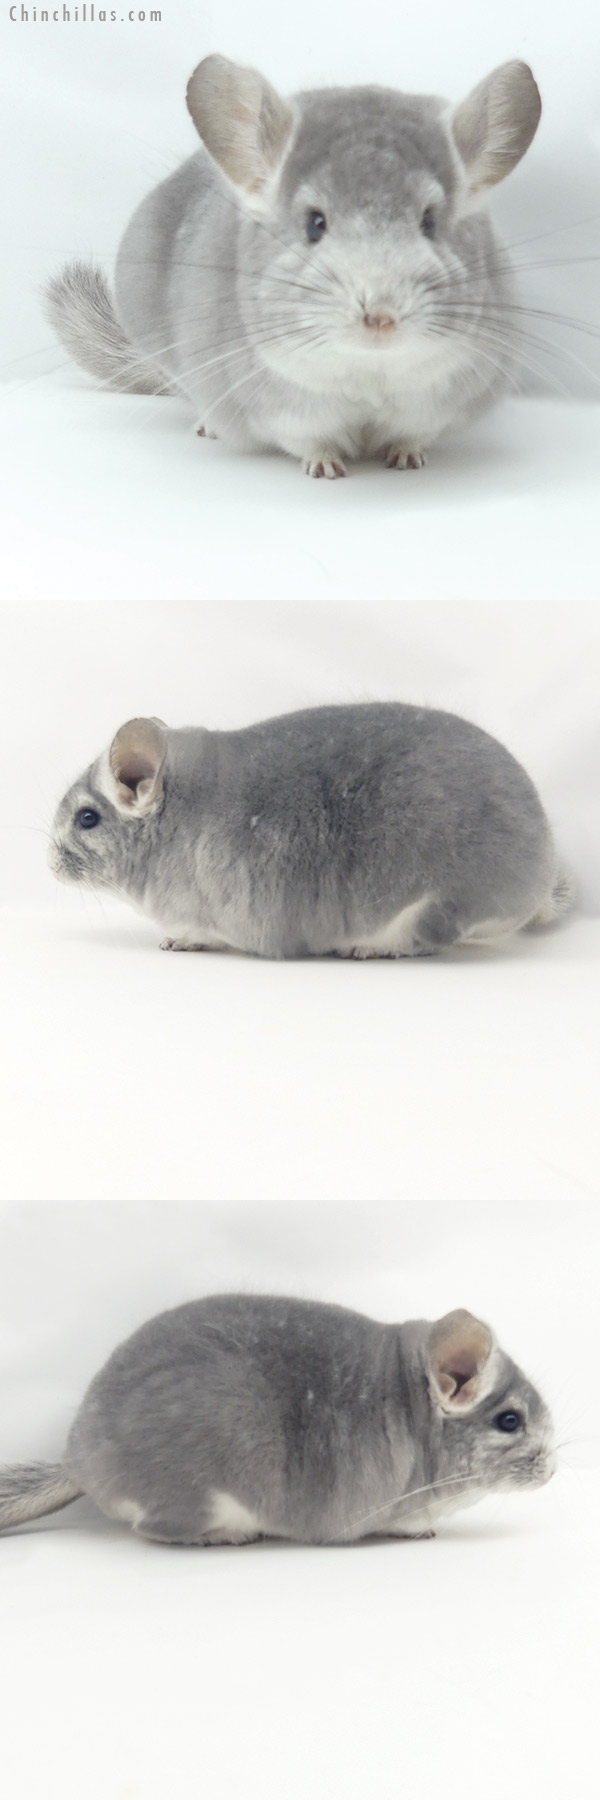 Chinchilla or related item offered for sale or export on Chinchillas.com - 20152 Large Premium Production Quality Violet Fading White Female Chinchilla